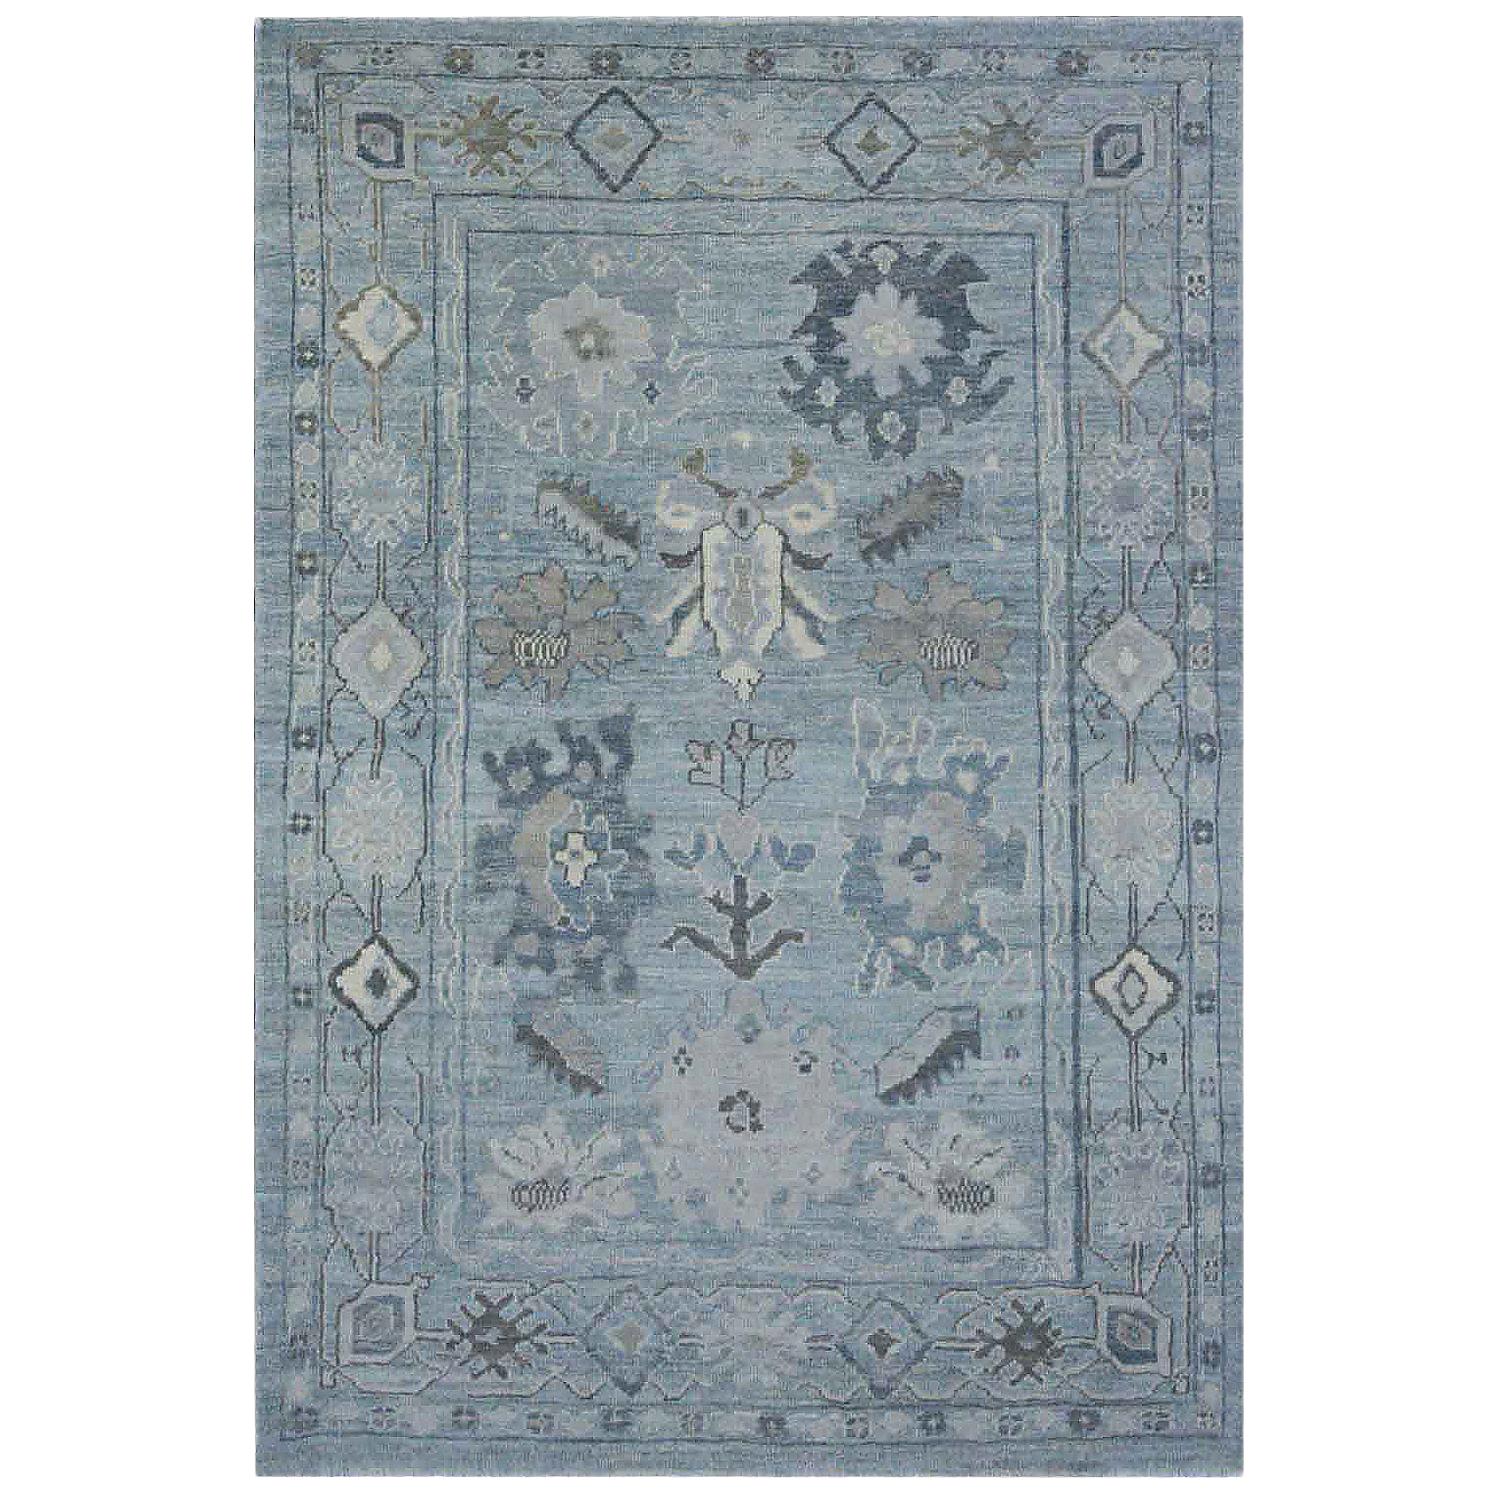 Contemporary Oushak Rug with Floral Details in Navy and Gray on Blue Field For Sale